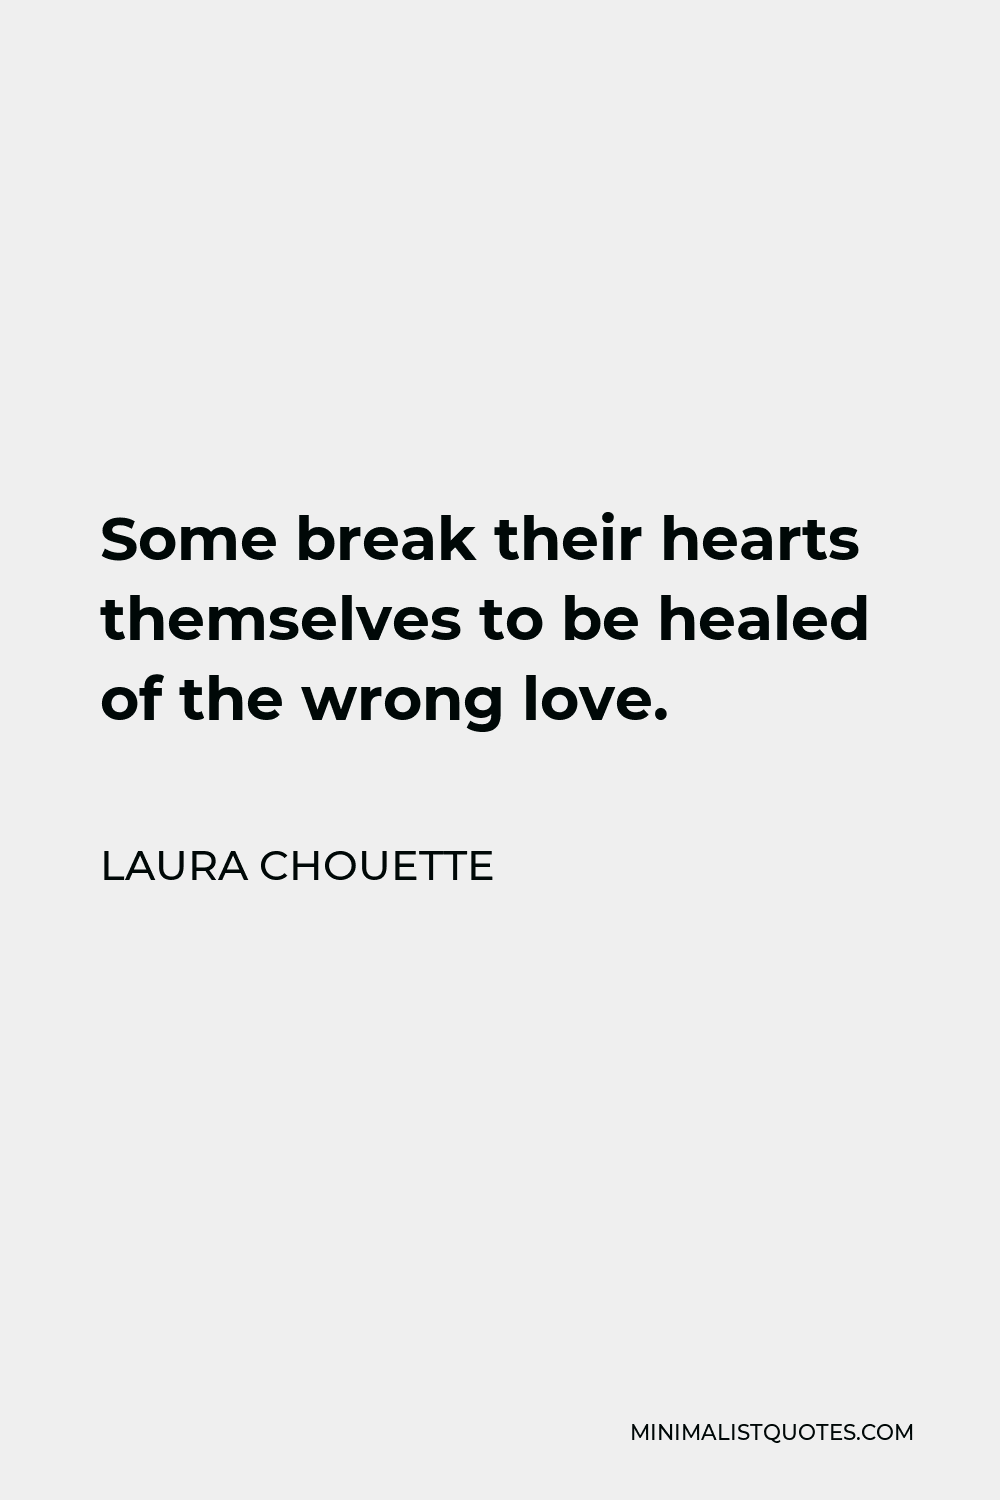 Laura Chouette Quote - Some break their hearts themselves to be healed of the wrong love.